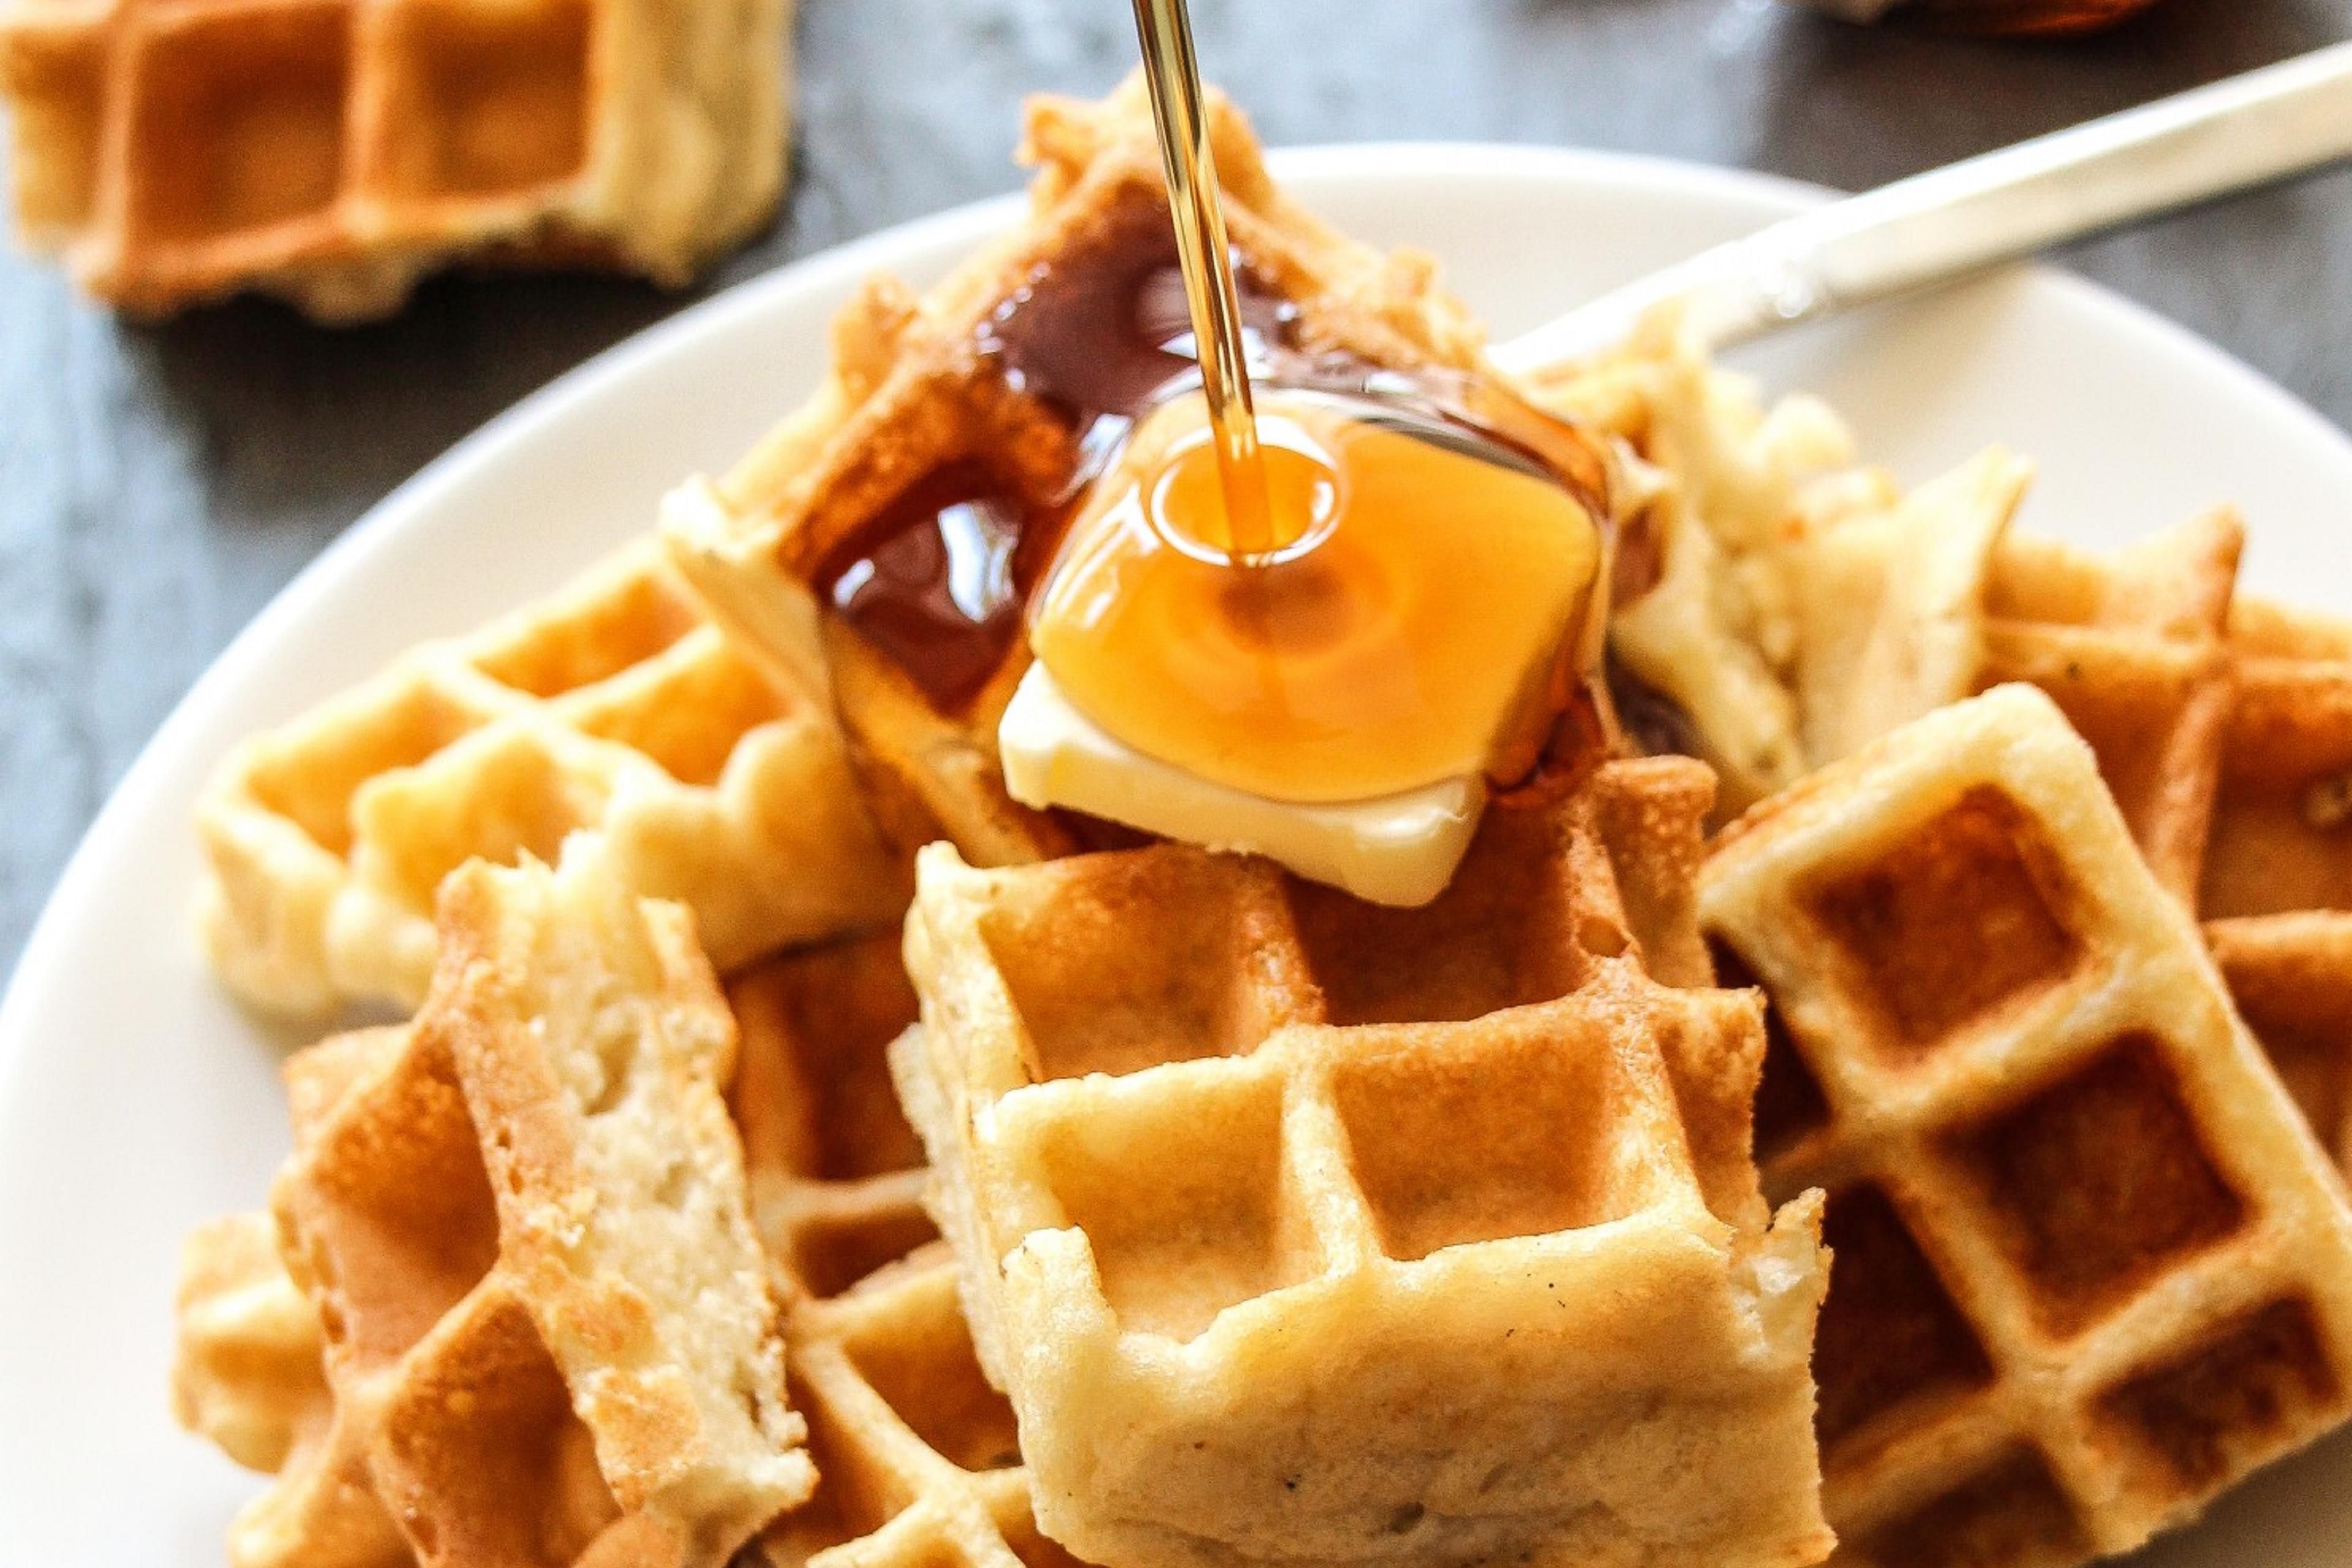 Savor in one of the perks of being our guest and start your day off right with our fresh hot breakfast buffet. Following COVID-19 regulations, we are happy to still be able to offer guests hot items including our delicious waffles made fresh to order!